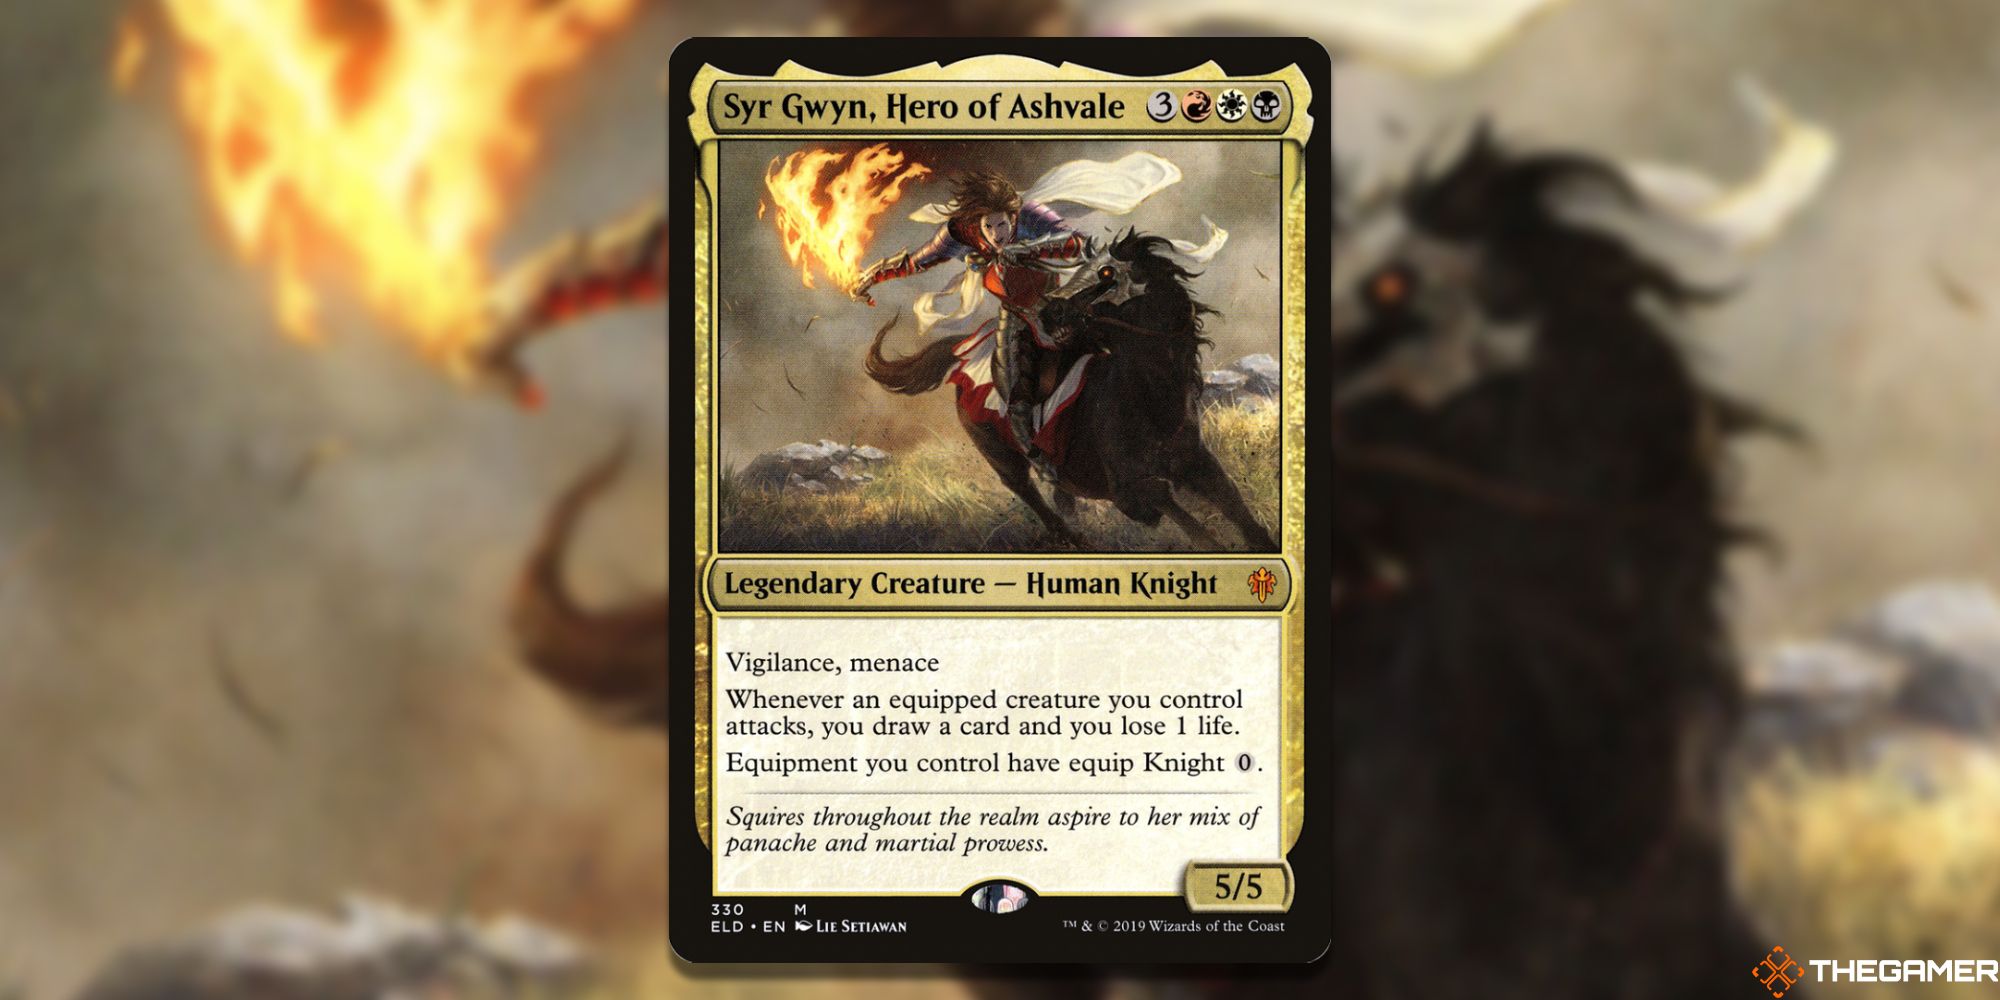 Image of the Syr Gwyn, Hero of Ashvale card in Magic: The Gathering, with art by Lie Setiawan